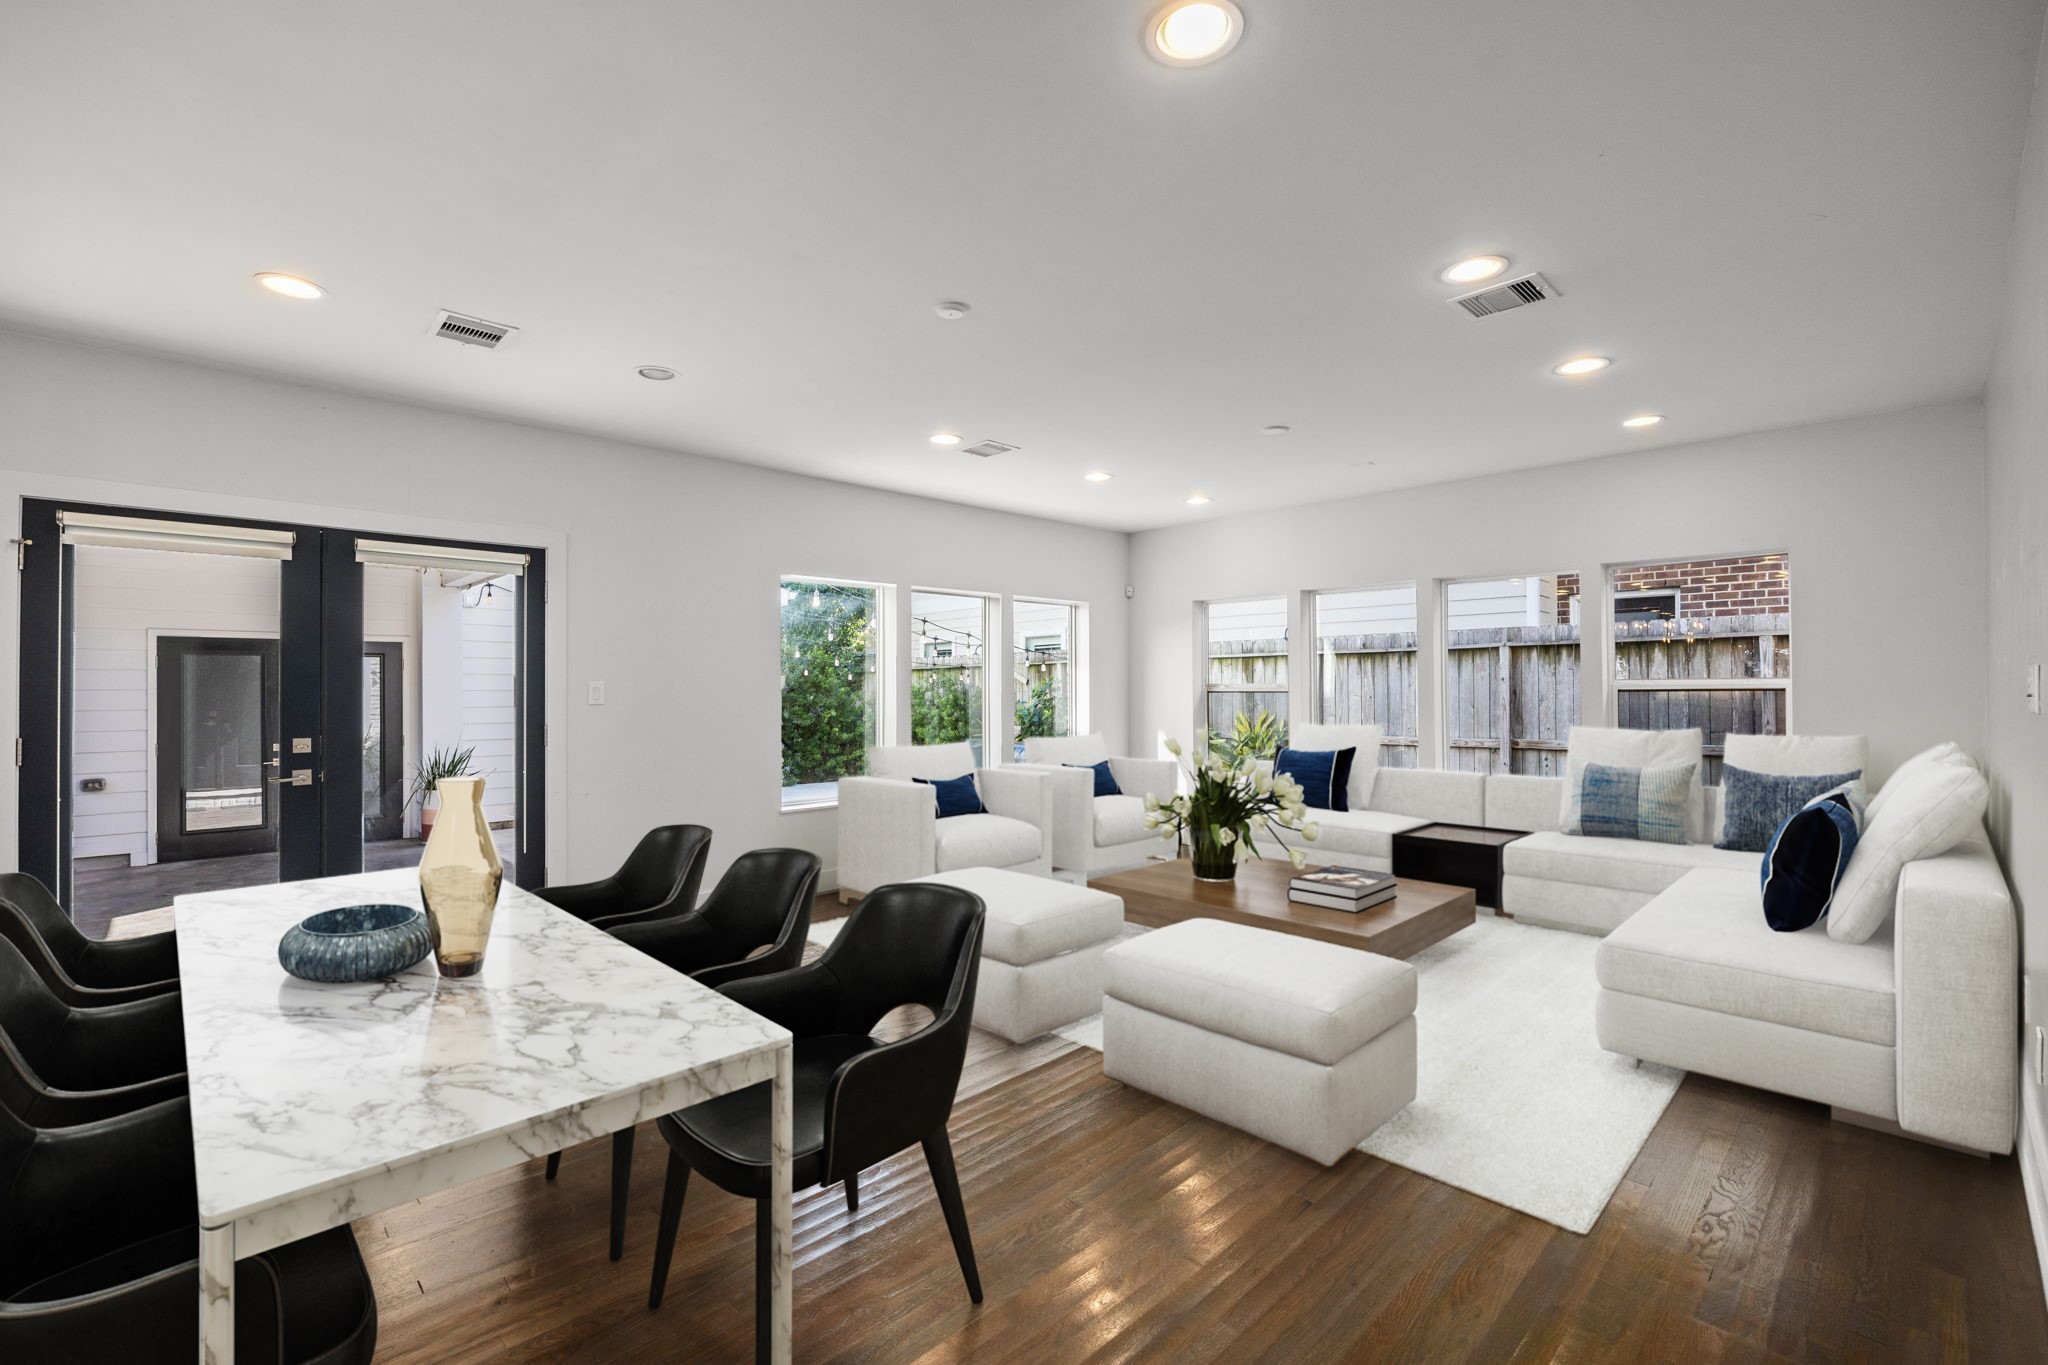 Gorgeous natural light pours through the home, including the formal dining room, spacious living room with picture windows overlooking the pool and backyard, and chef's kitchen.